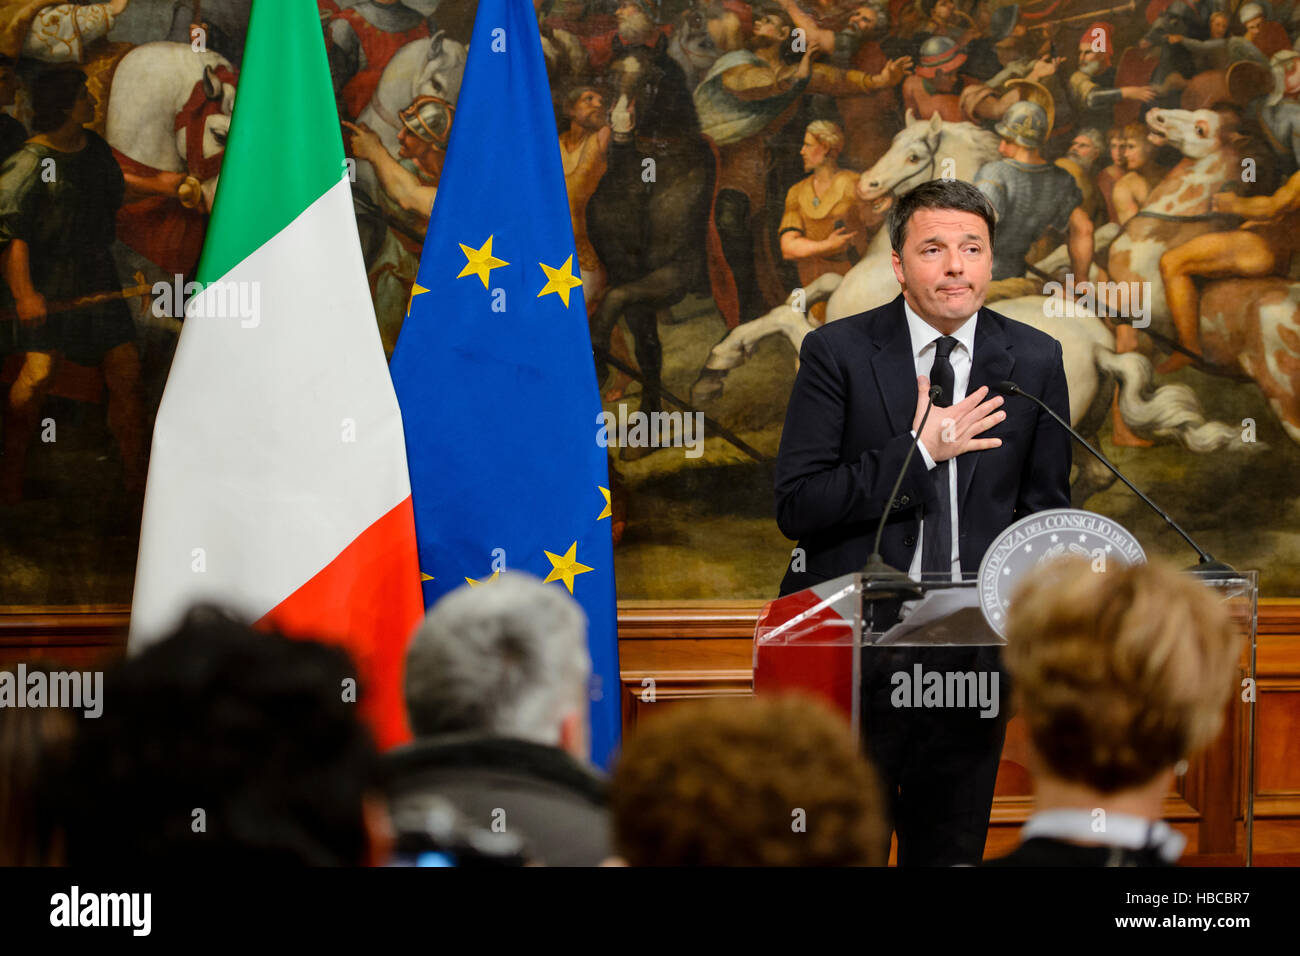 Rome, Italy. 4th Dec, 2016. Italy's prime minister Matteo Renzi speaks about a change of consitution after the referendum at the Palazzo Chigi in Rome, Italy, 4 December 2016. Renzi has announced his resignation after the loss he has suffered in wake of the referendum concerning a constitutional reform. Photo: Gregor Fischer/dpa/Alamy Live News Stock Photo